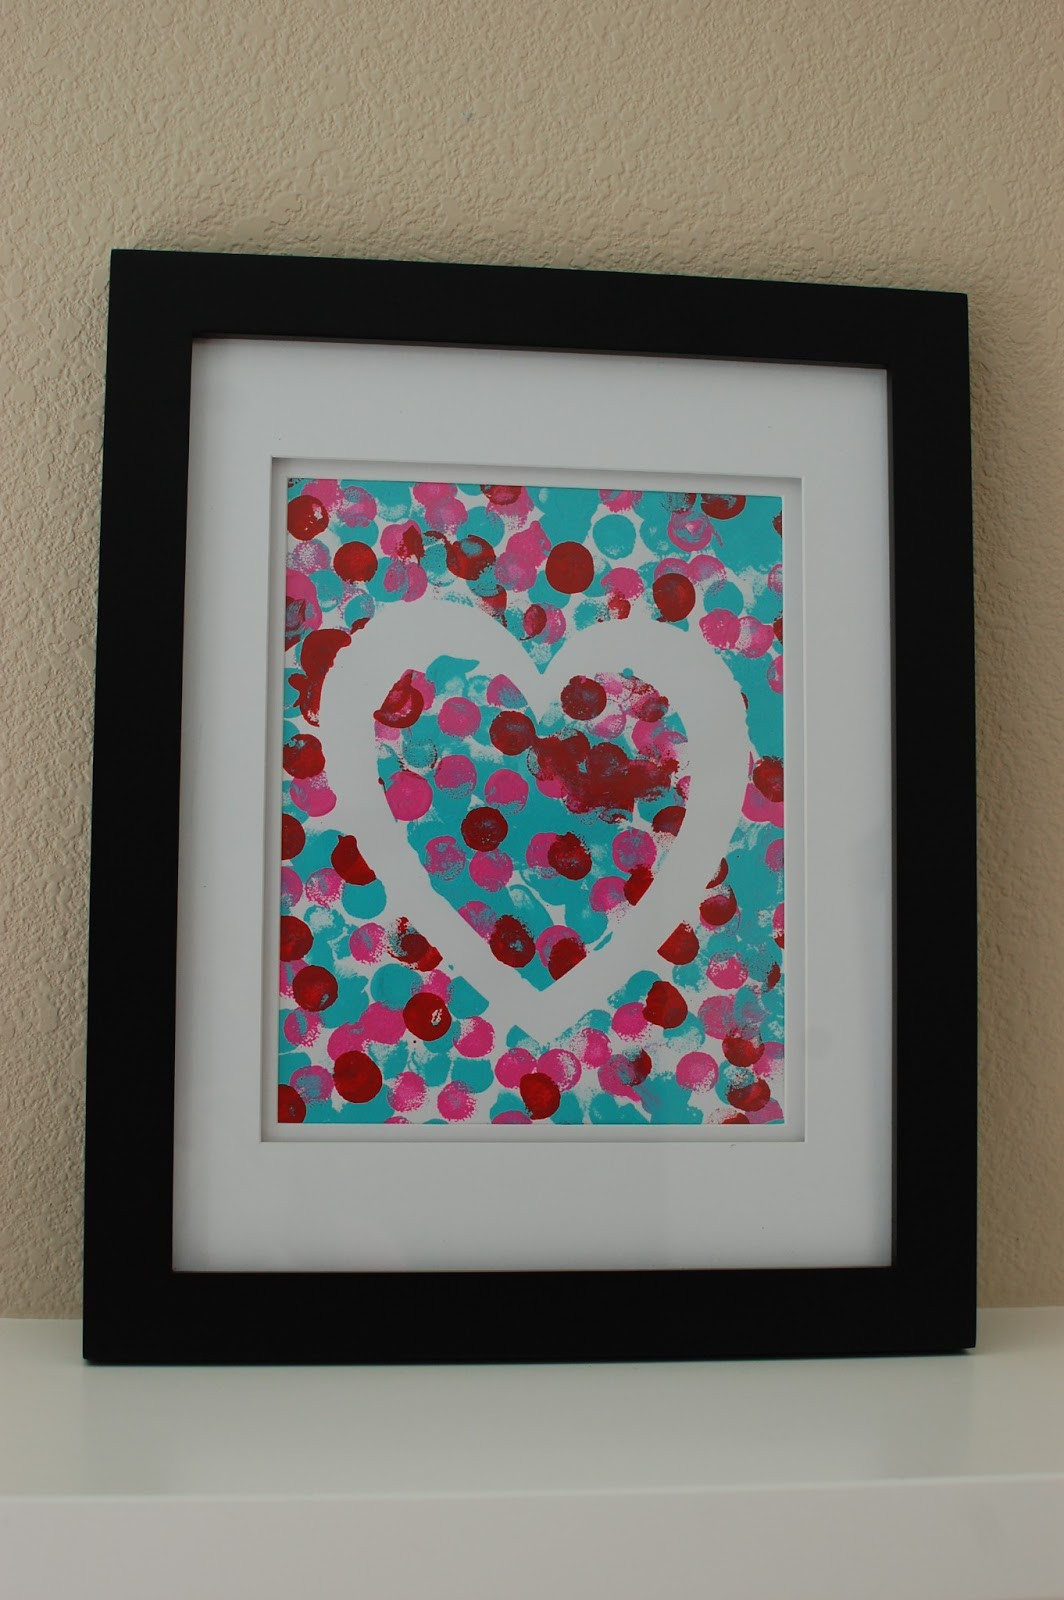 Best ideas about Valentine Art Projects For Toddlers
. Save or Pin Pinkie for Pink Kid s Valentine s Day Art Projects Now.